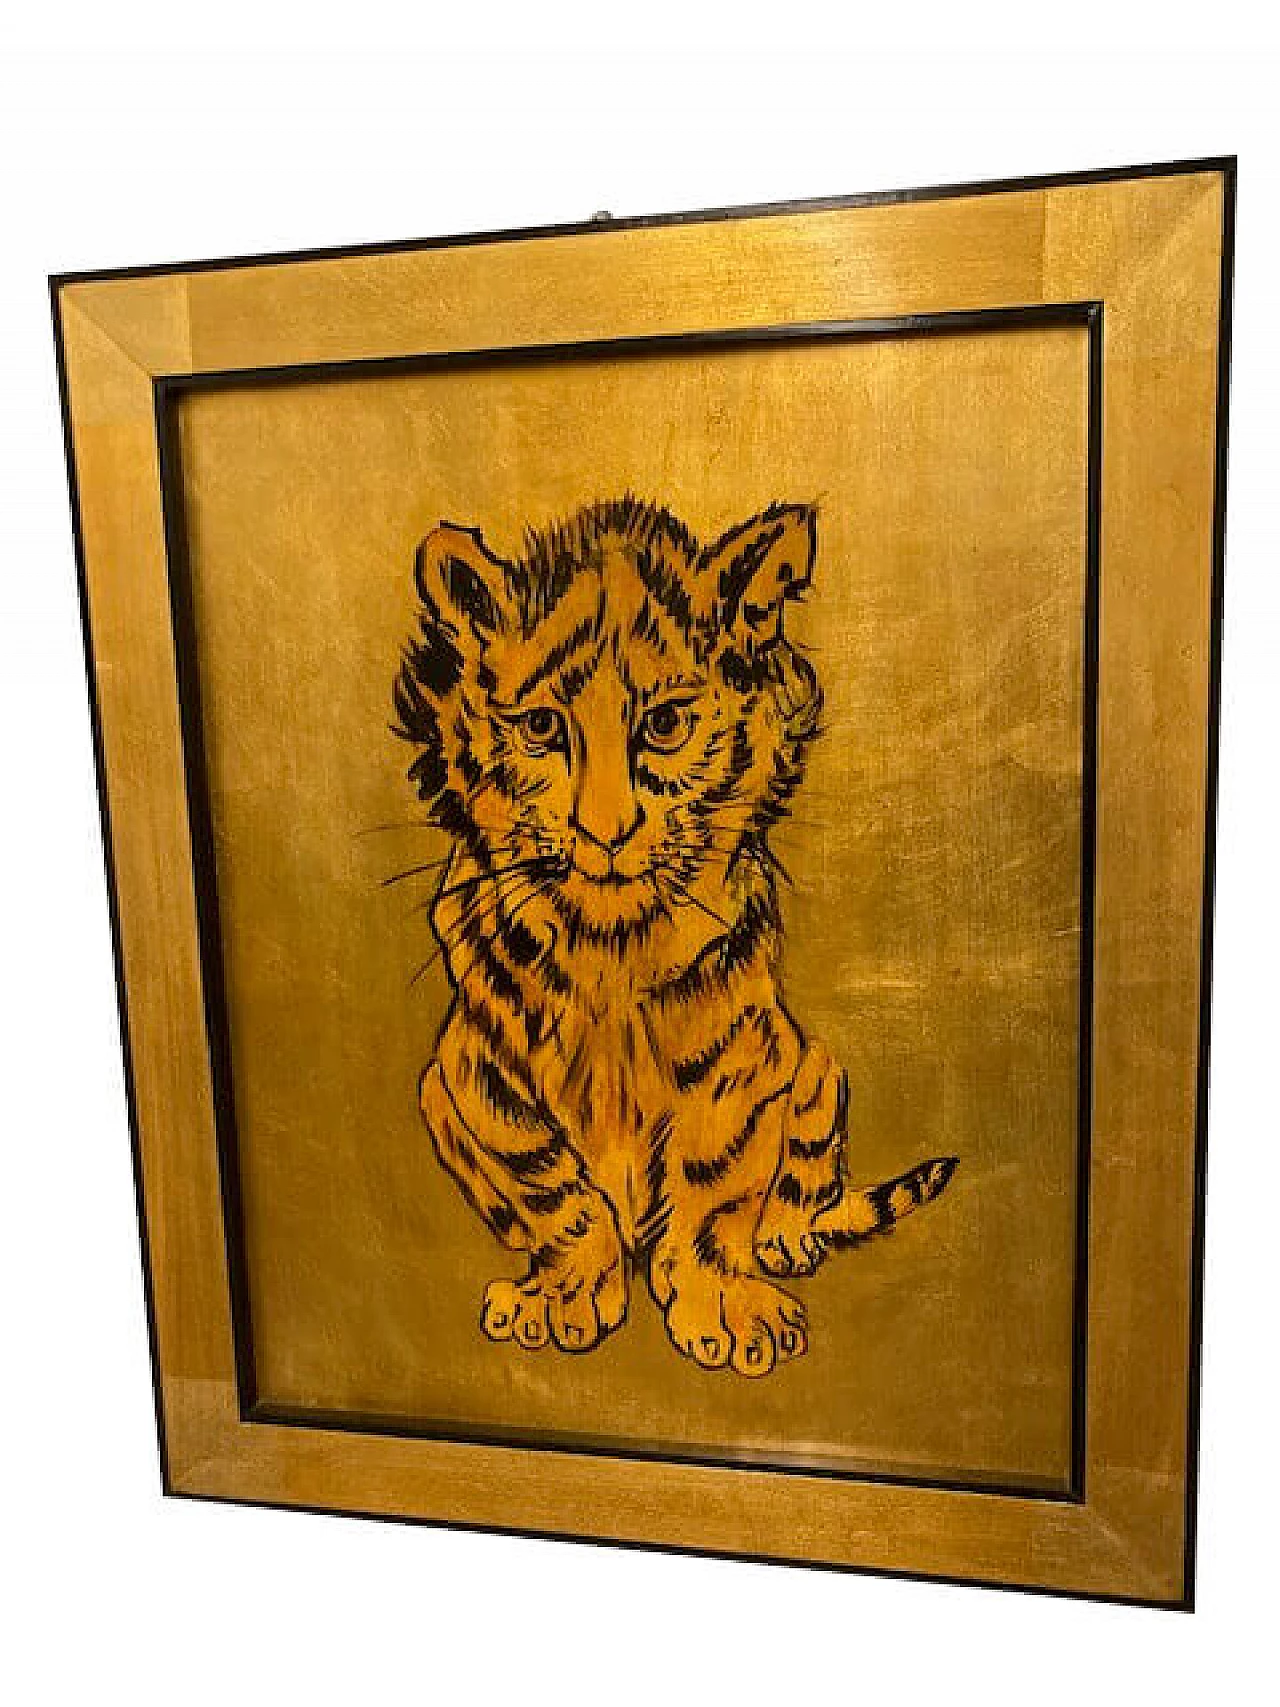 Gold background painting of a tiger, early 20th century 10